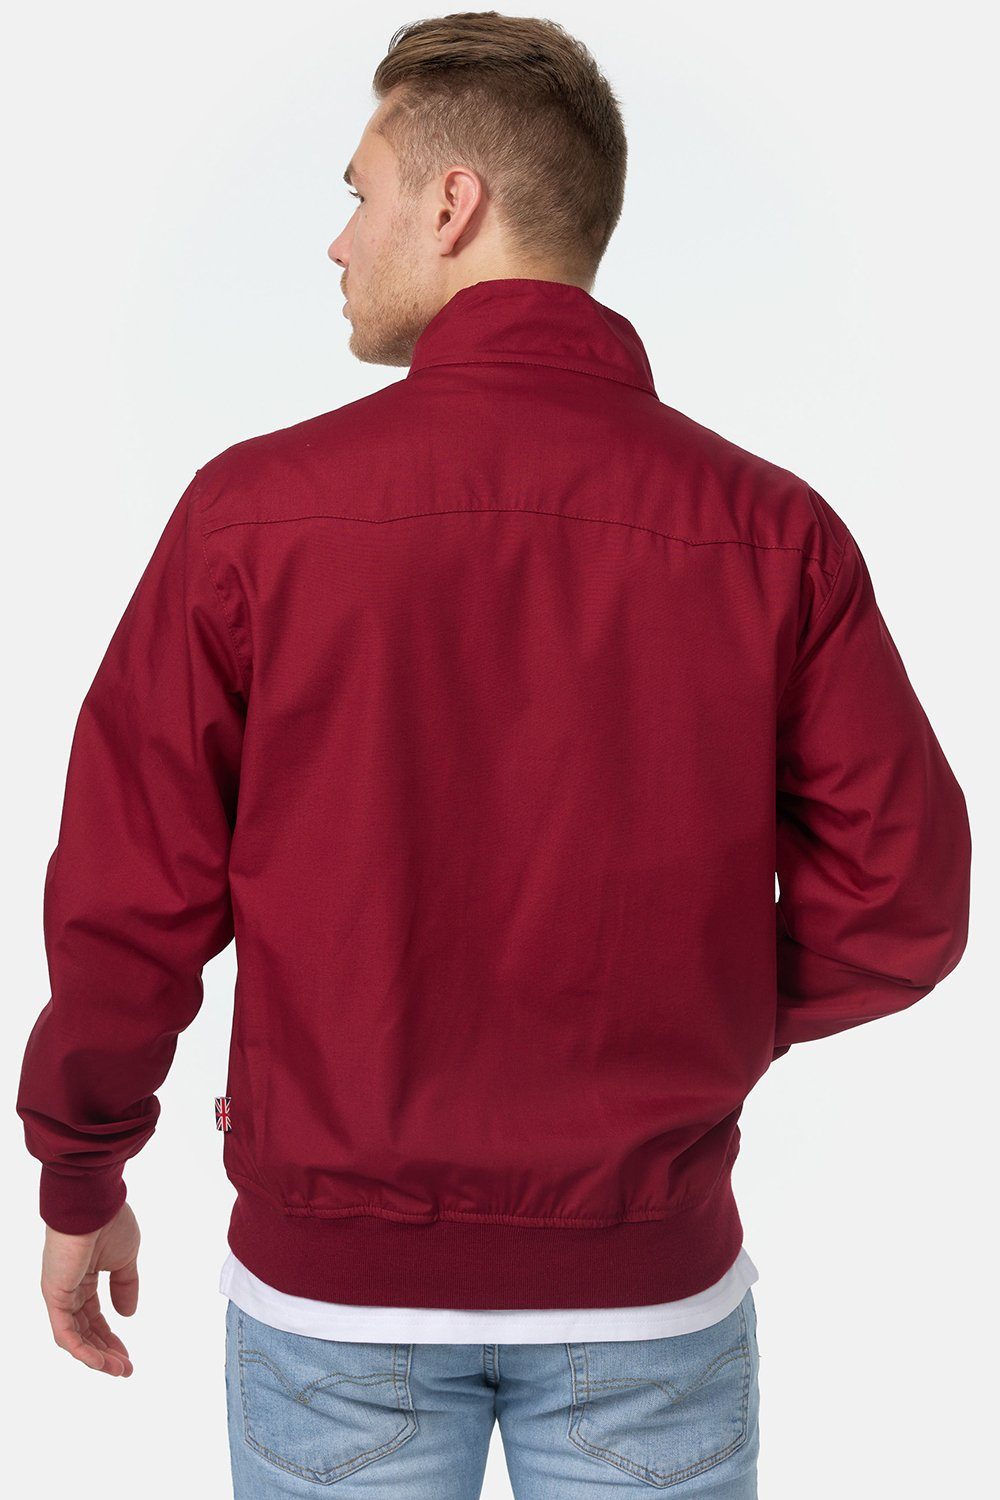 CLASSIC Allwetterjacke Lonsdale Red Cherry